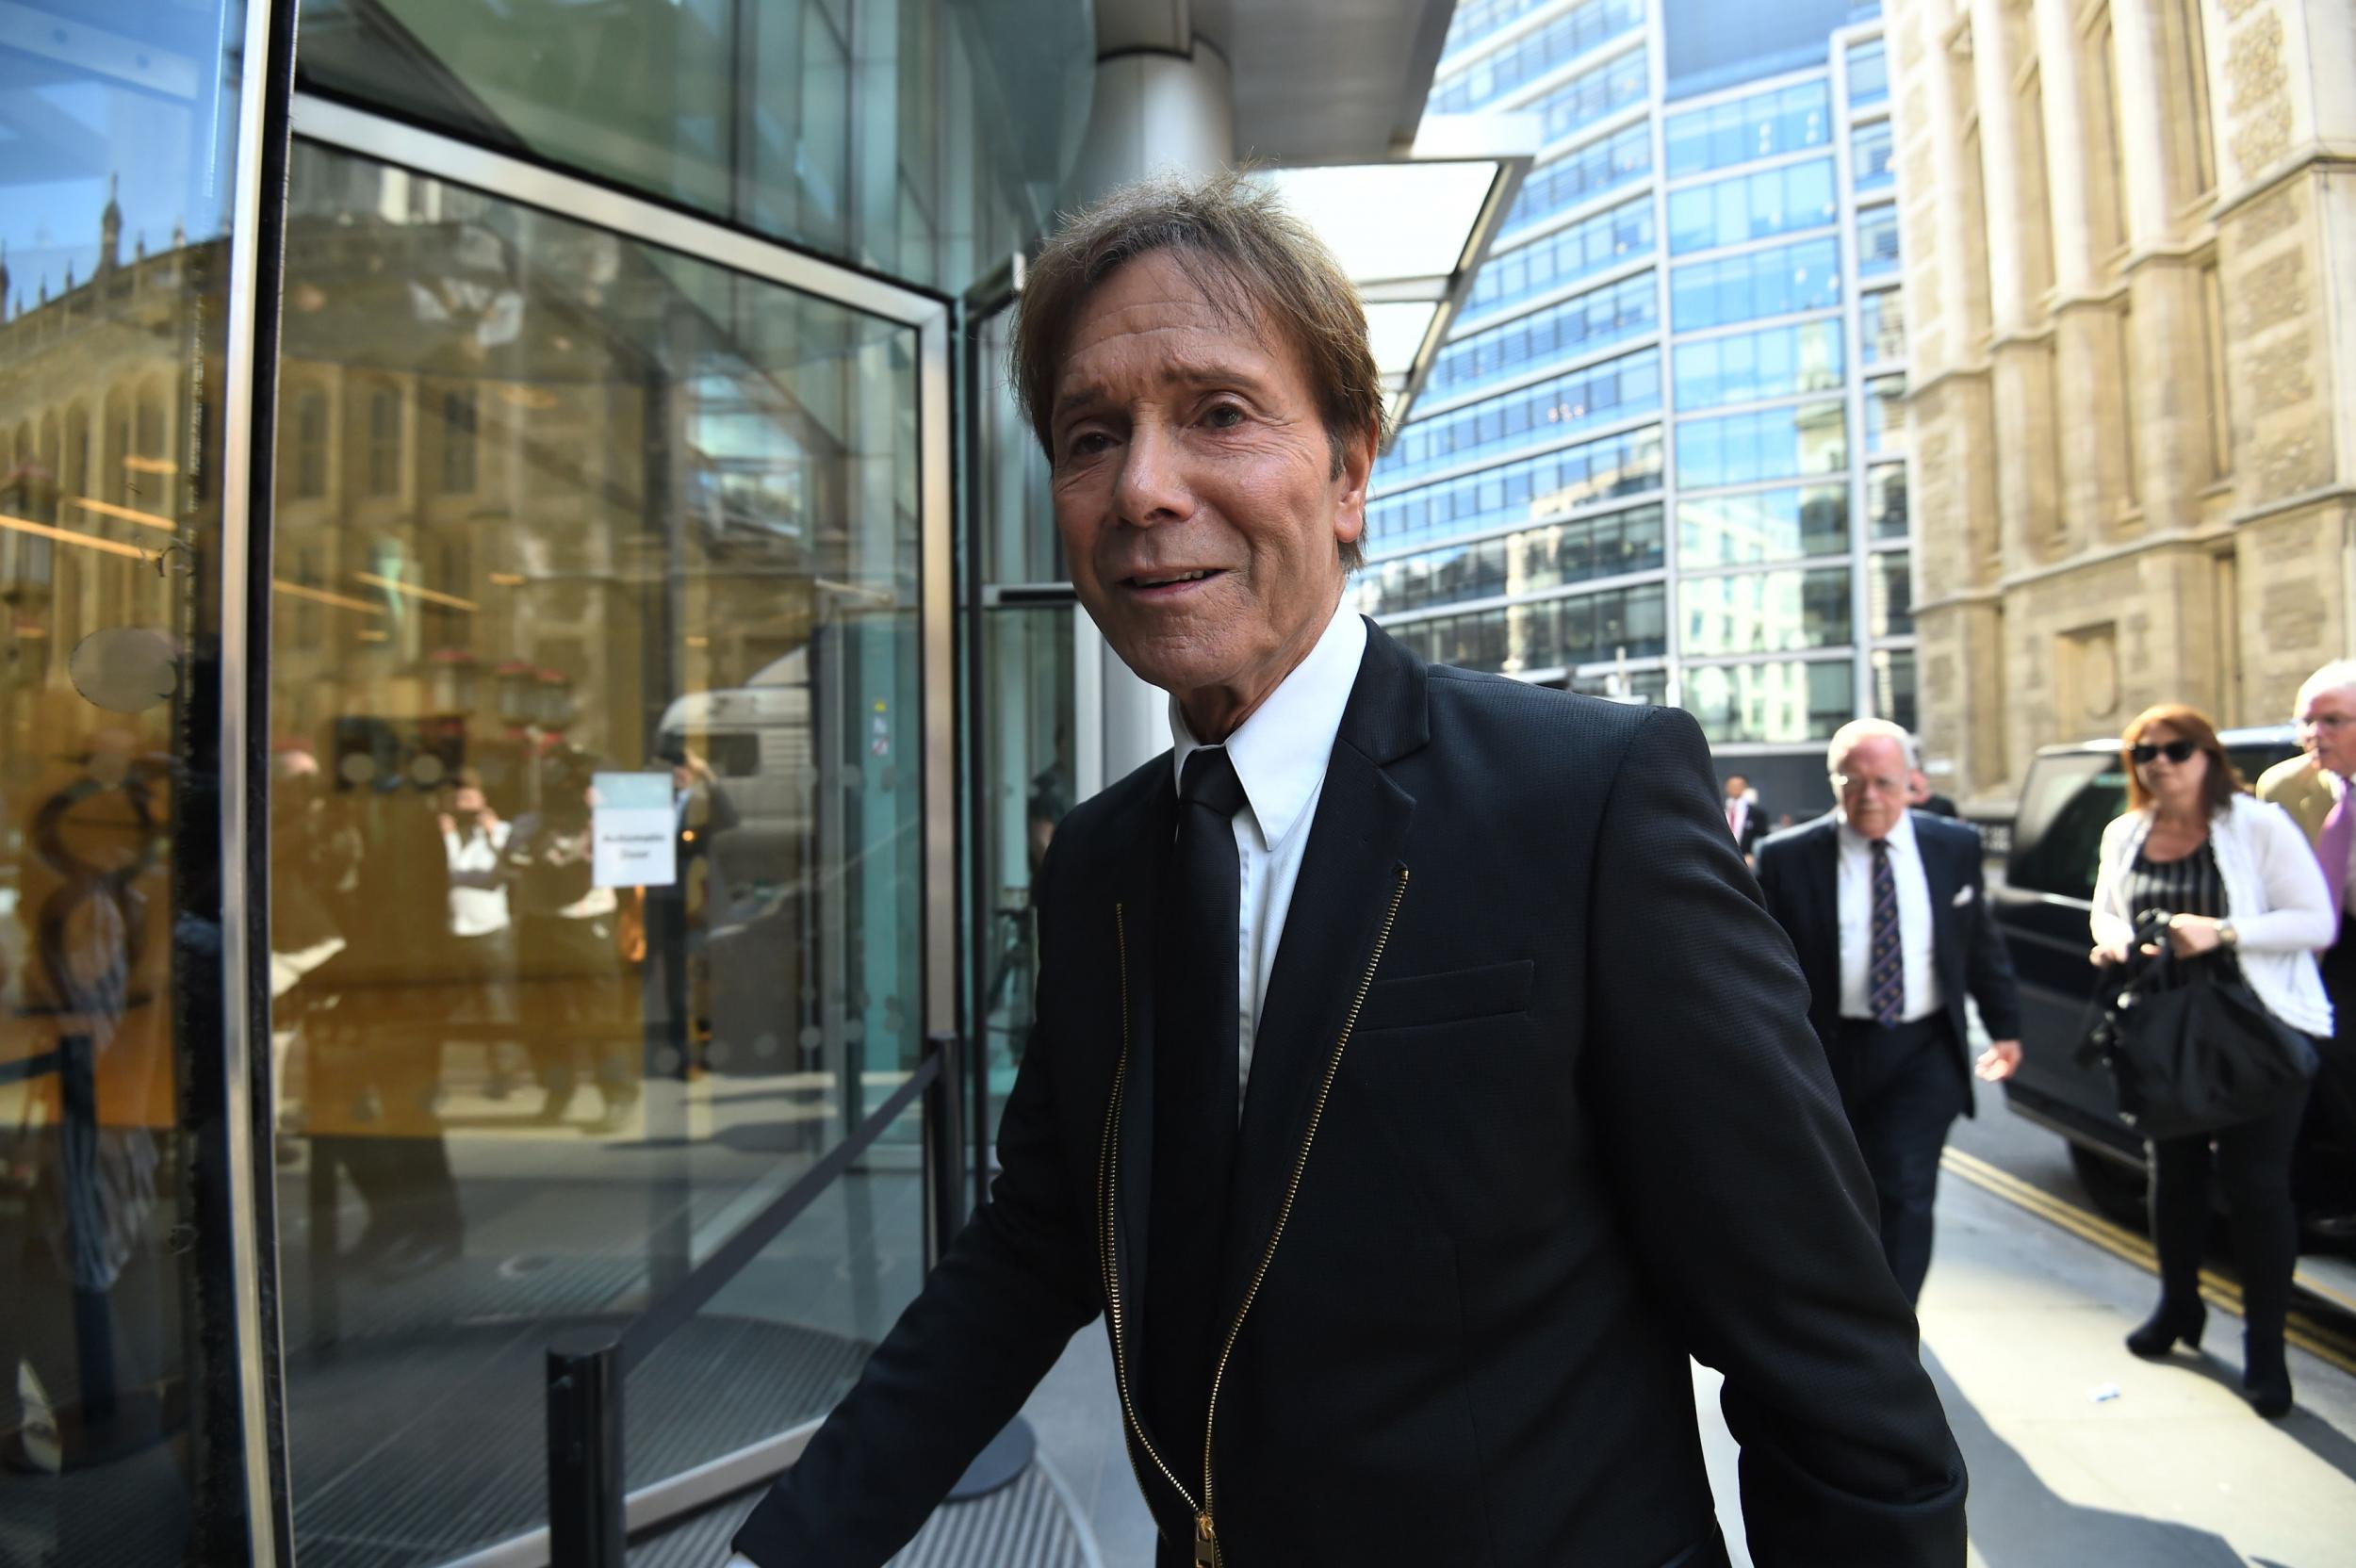 Sir Cliff Richard arrives at the Rolls Building in London to hear more evidence from BBC reporter Dan Johnson